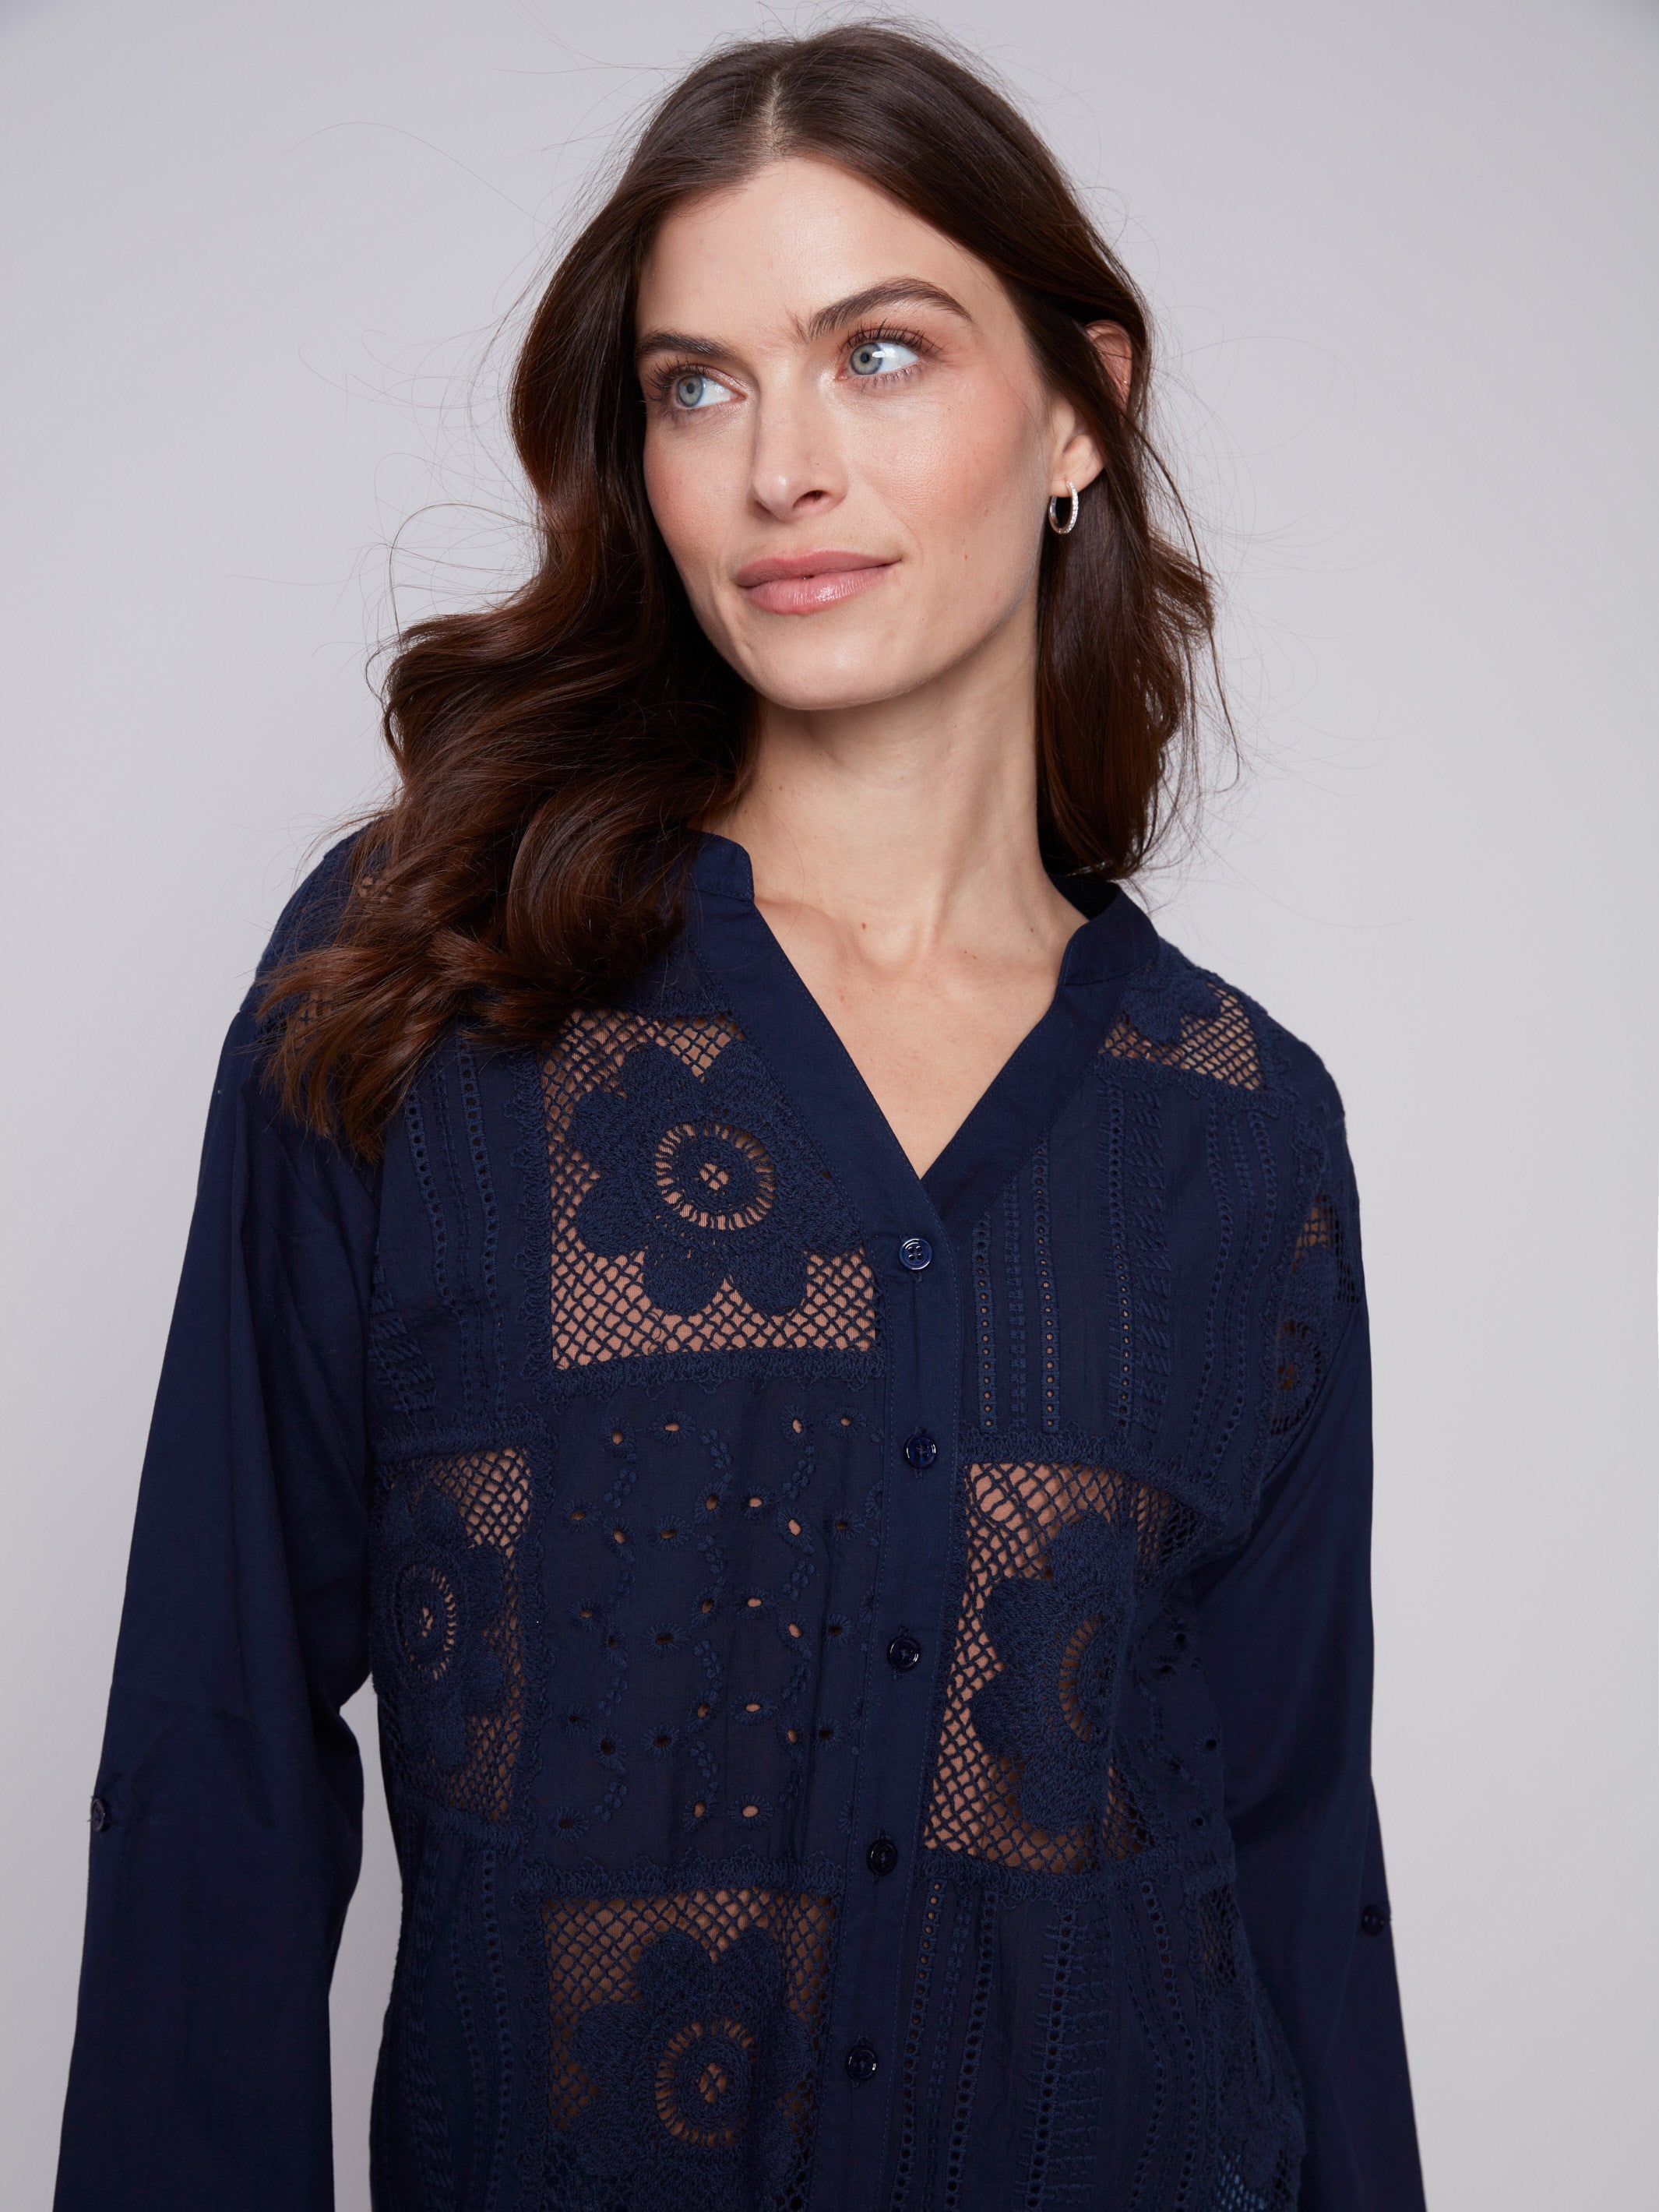 Cotton Eyelet Shirt - Navy - Charlie B Collection Canada - Image 5